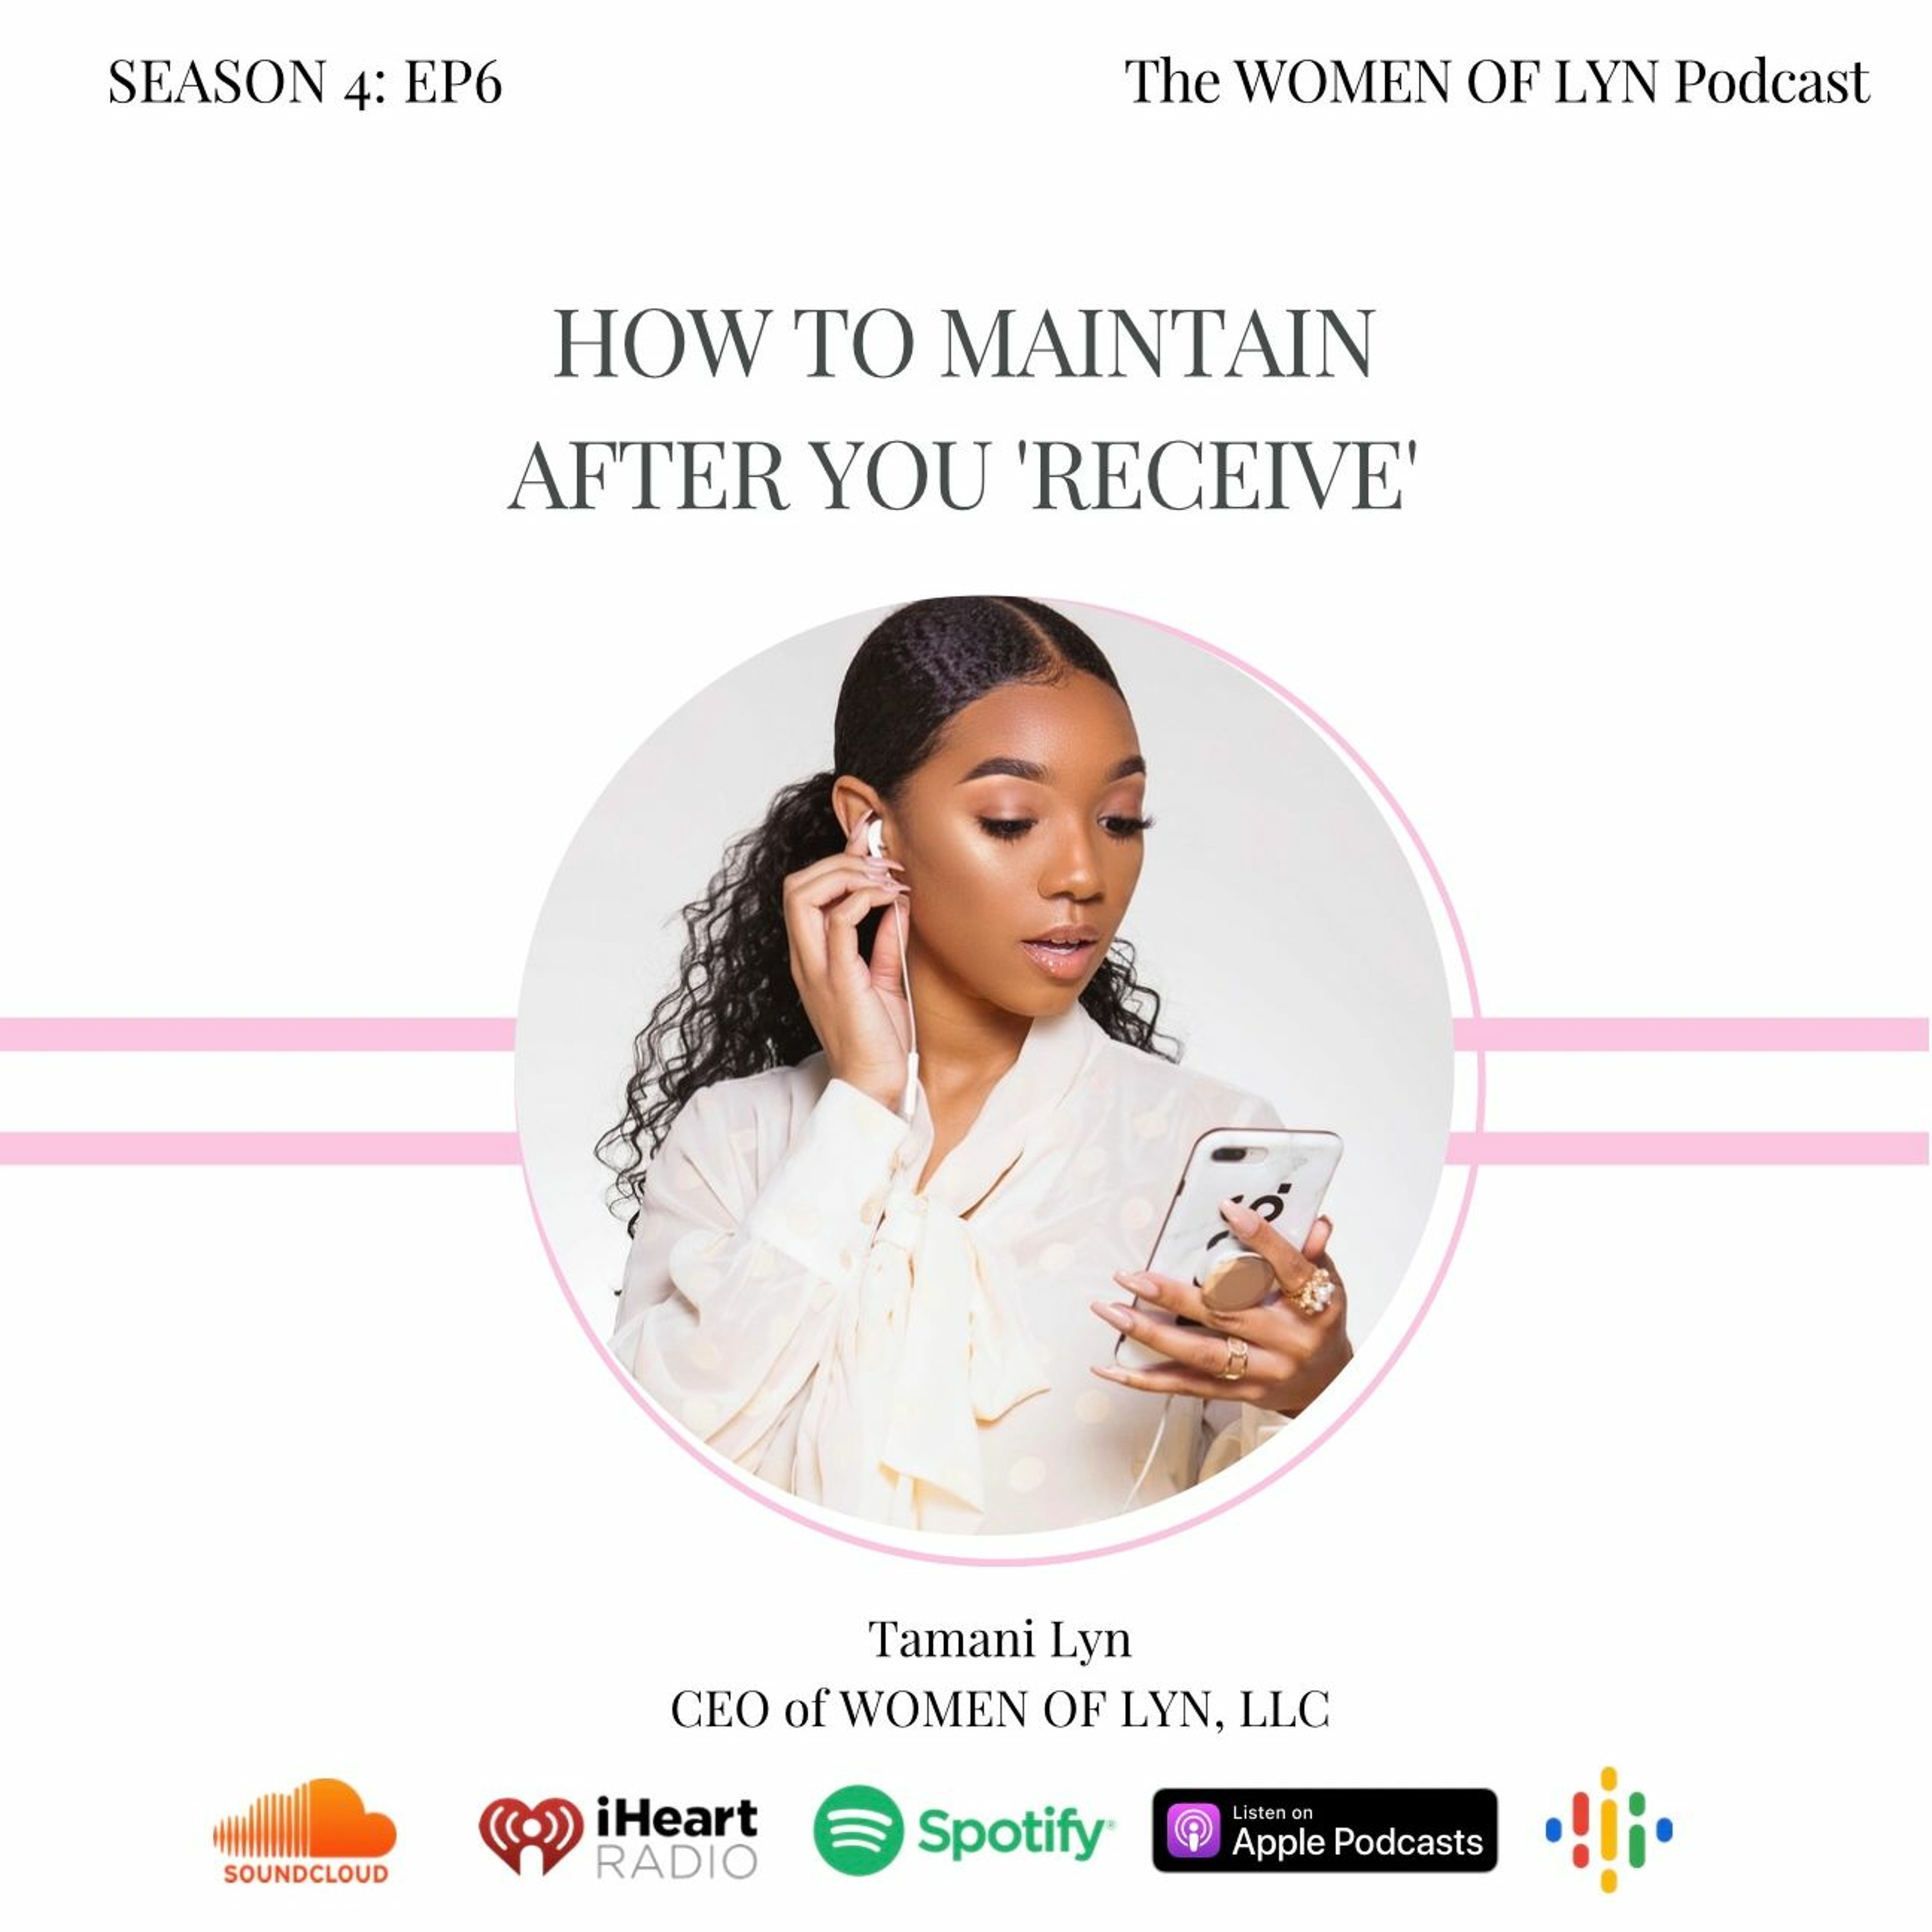 Episode 6: ”How To Maintain After You Receive”